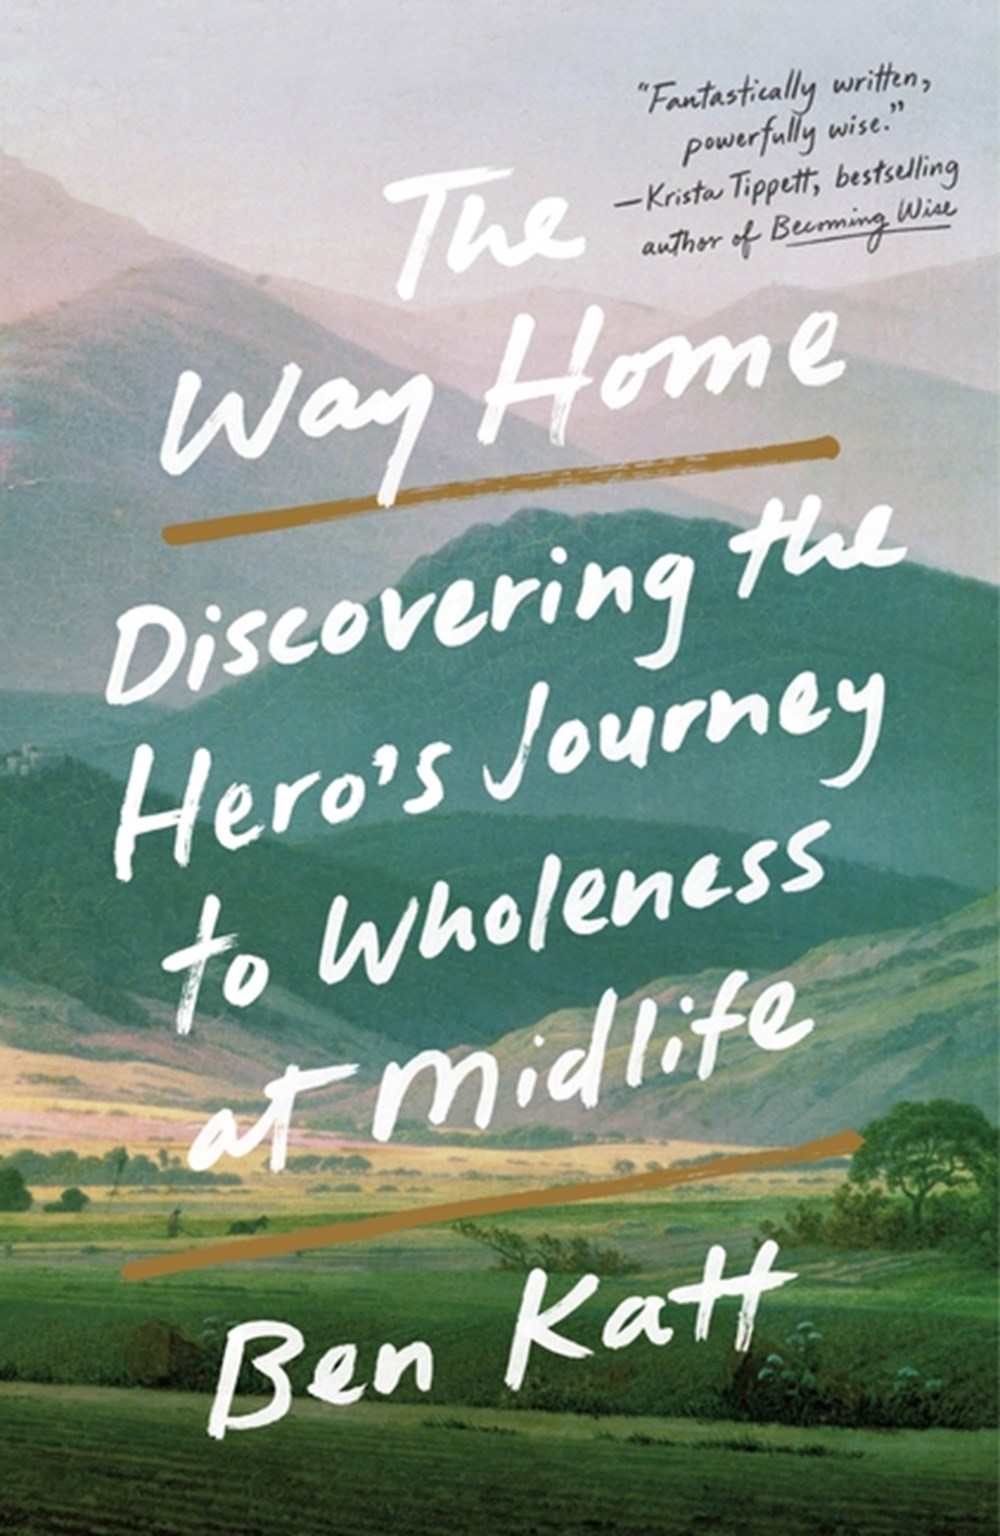 Way Home: Discovering the Hero's Journey to Wholeness at Midlife